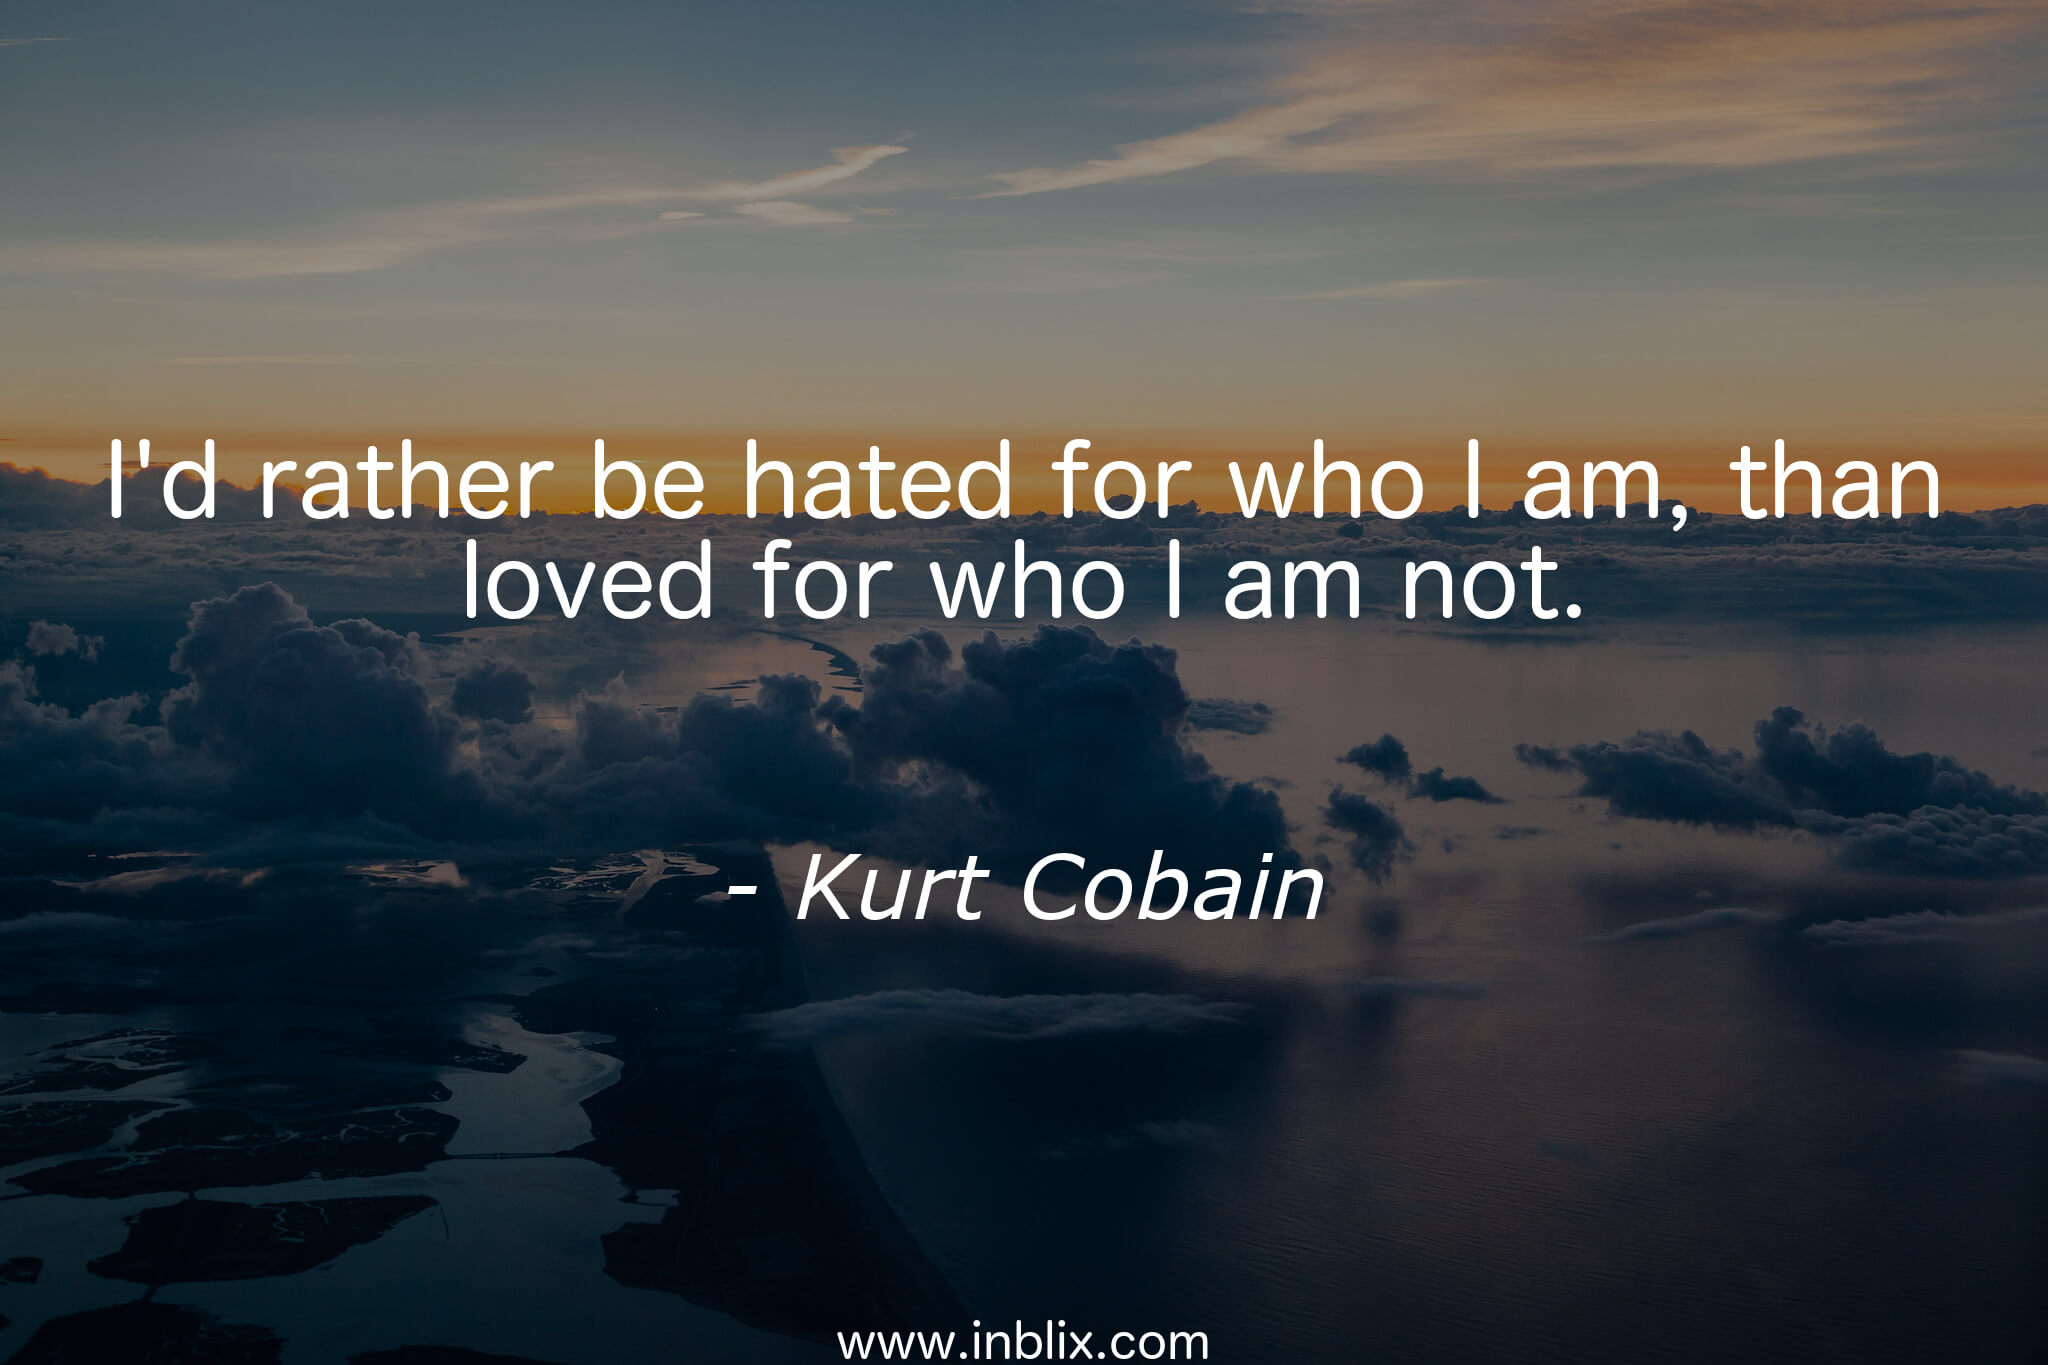 i'd rather Id-rather-hated-for-who-i-am-than-loved-for-who-i-am-not-kurt-cobain